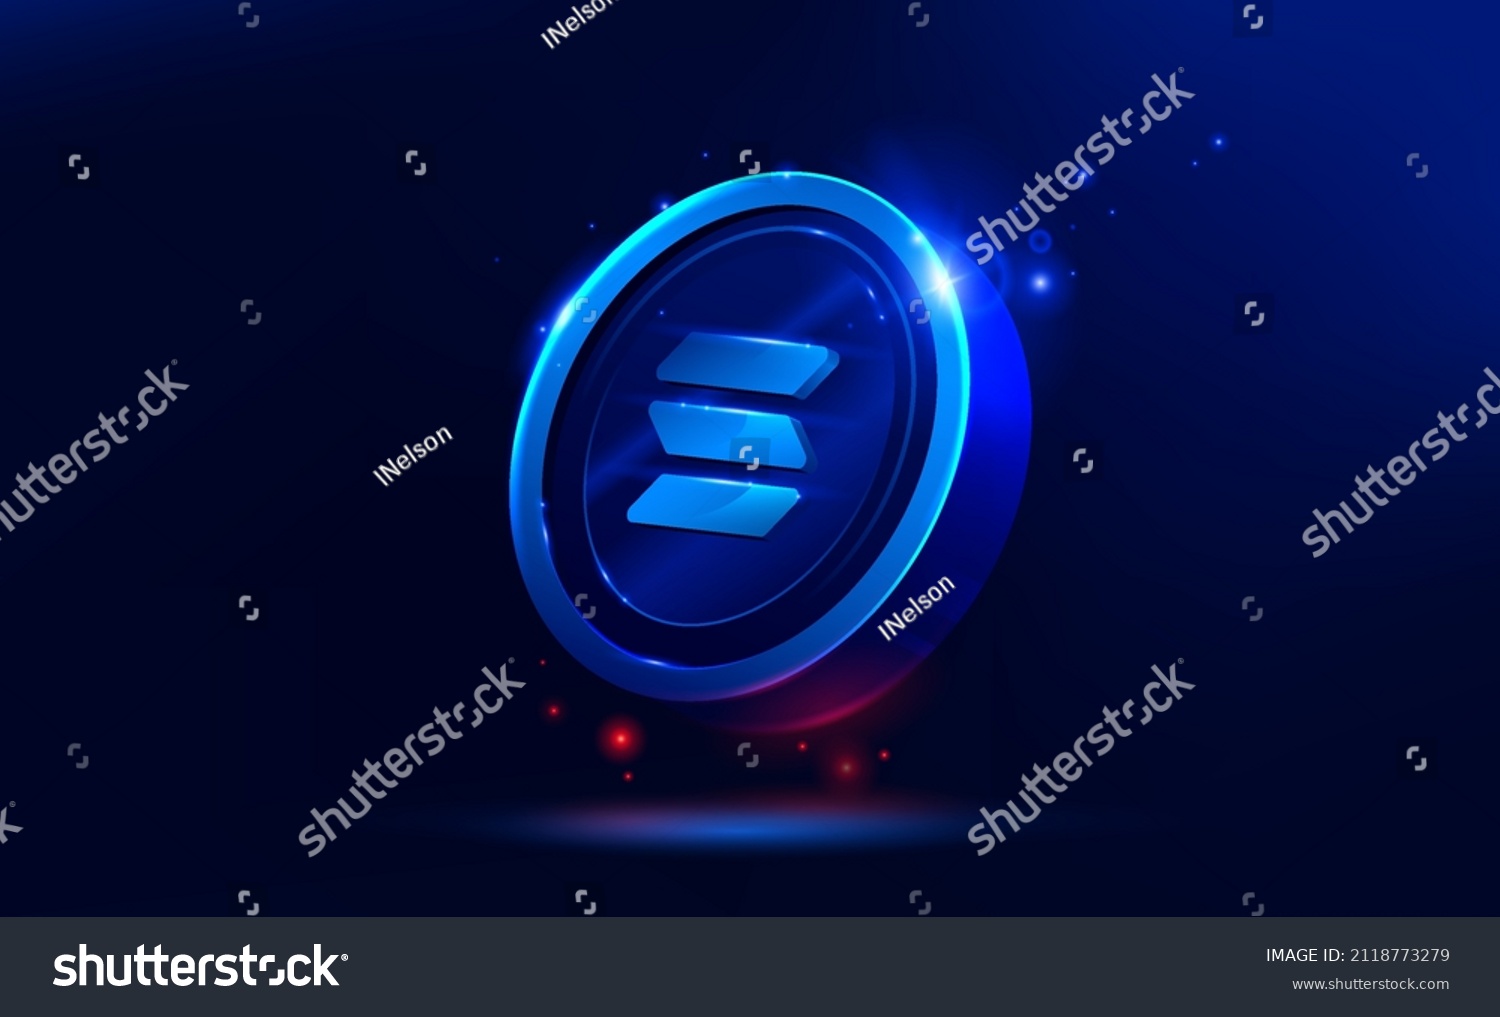 SVG of Solana or Sol coin crypto currency. Blockchain technology. A digital background. Vector abstract illustration svg